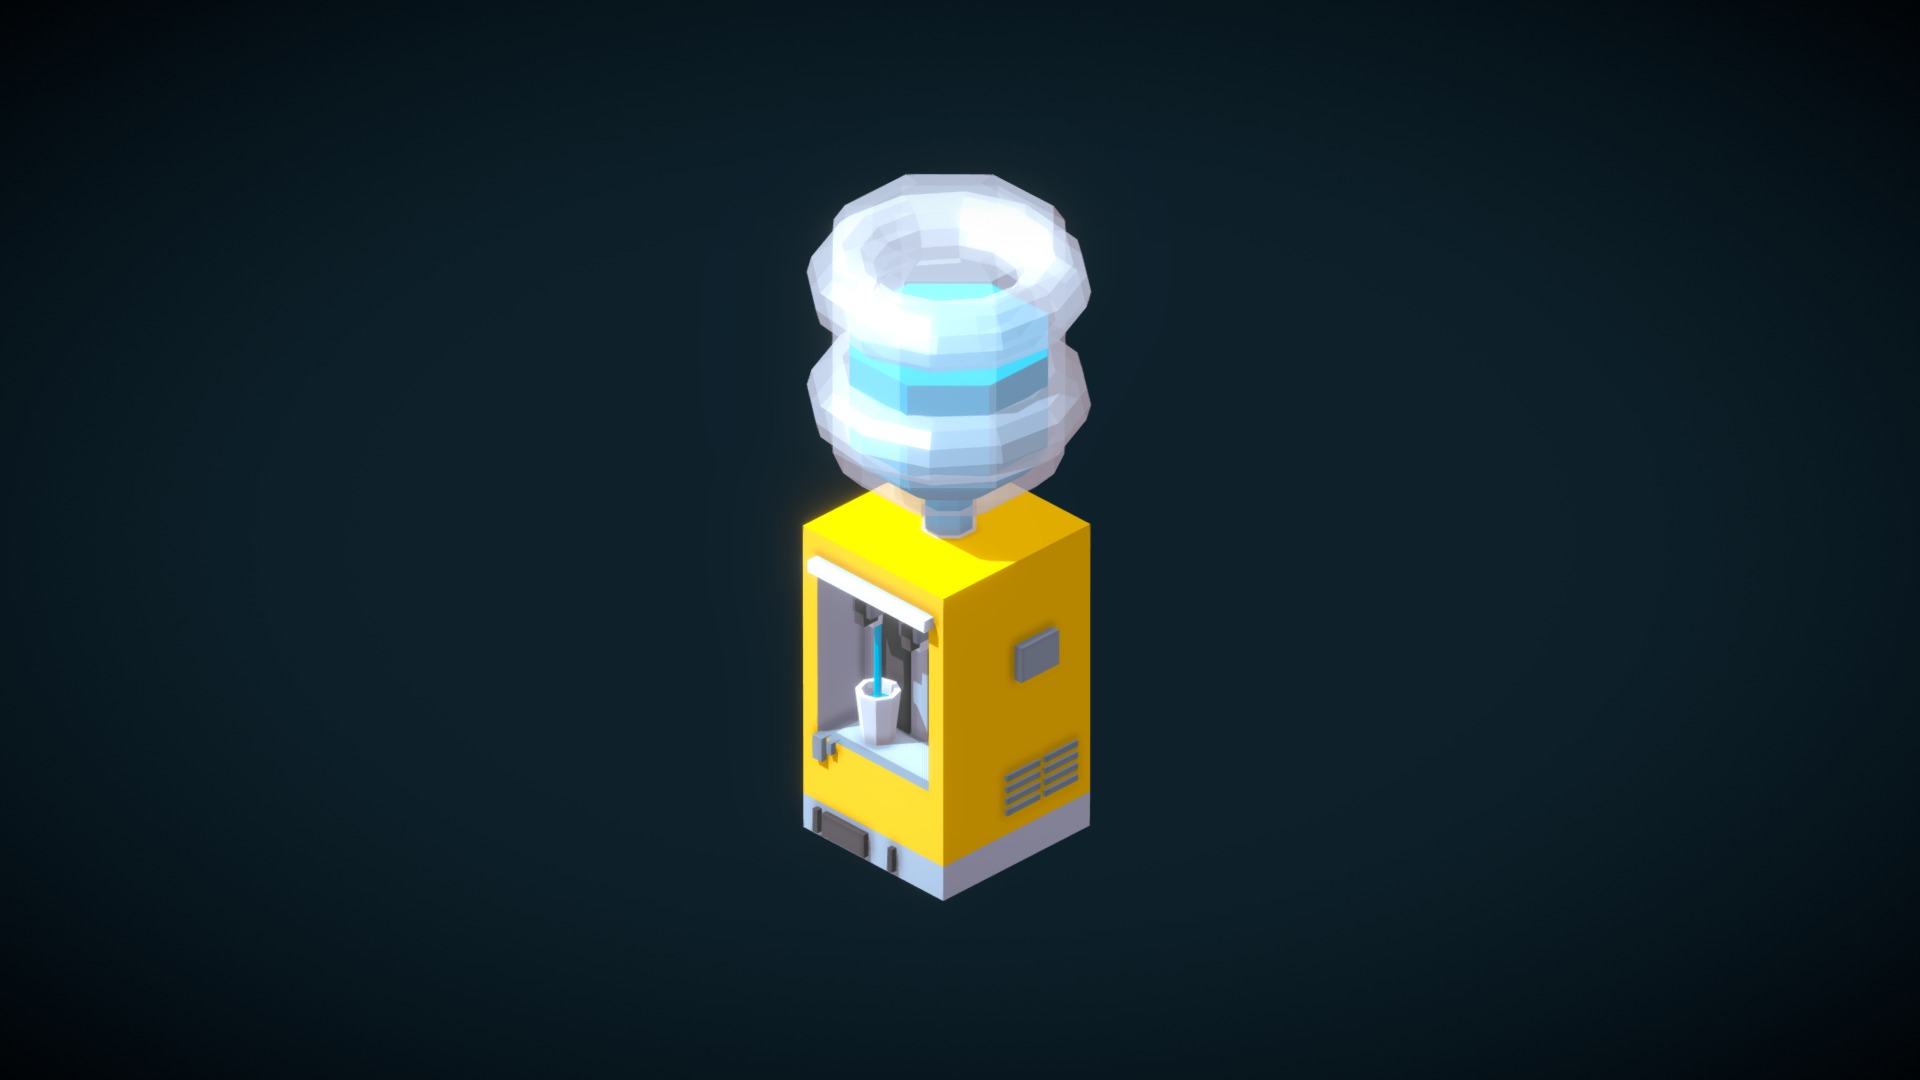 3D model Low Poly Water Cooler - This is a 3D model of the Low Poly Water Cooler. The 3D model is about a yellow and blue robot.